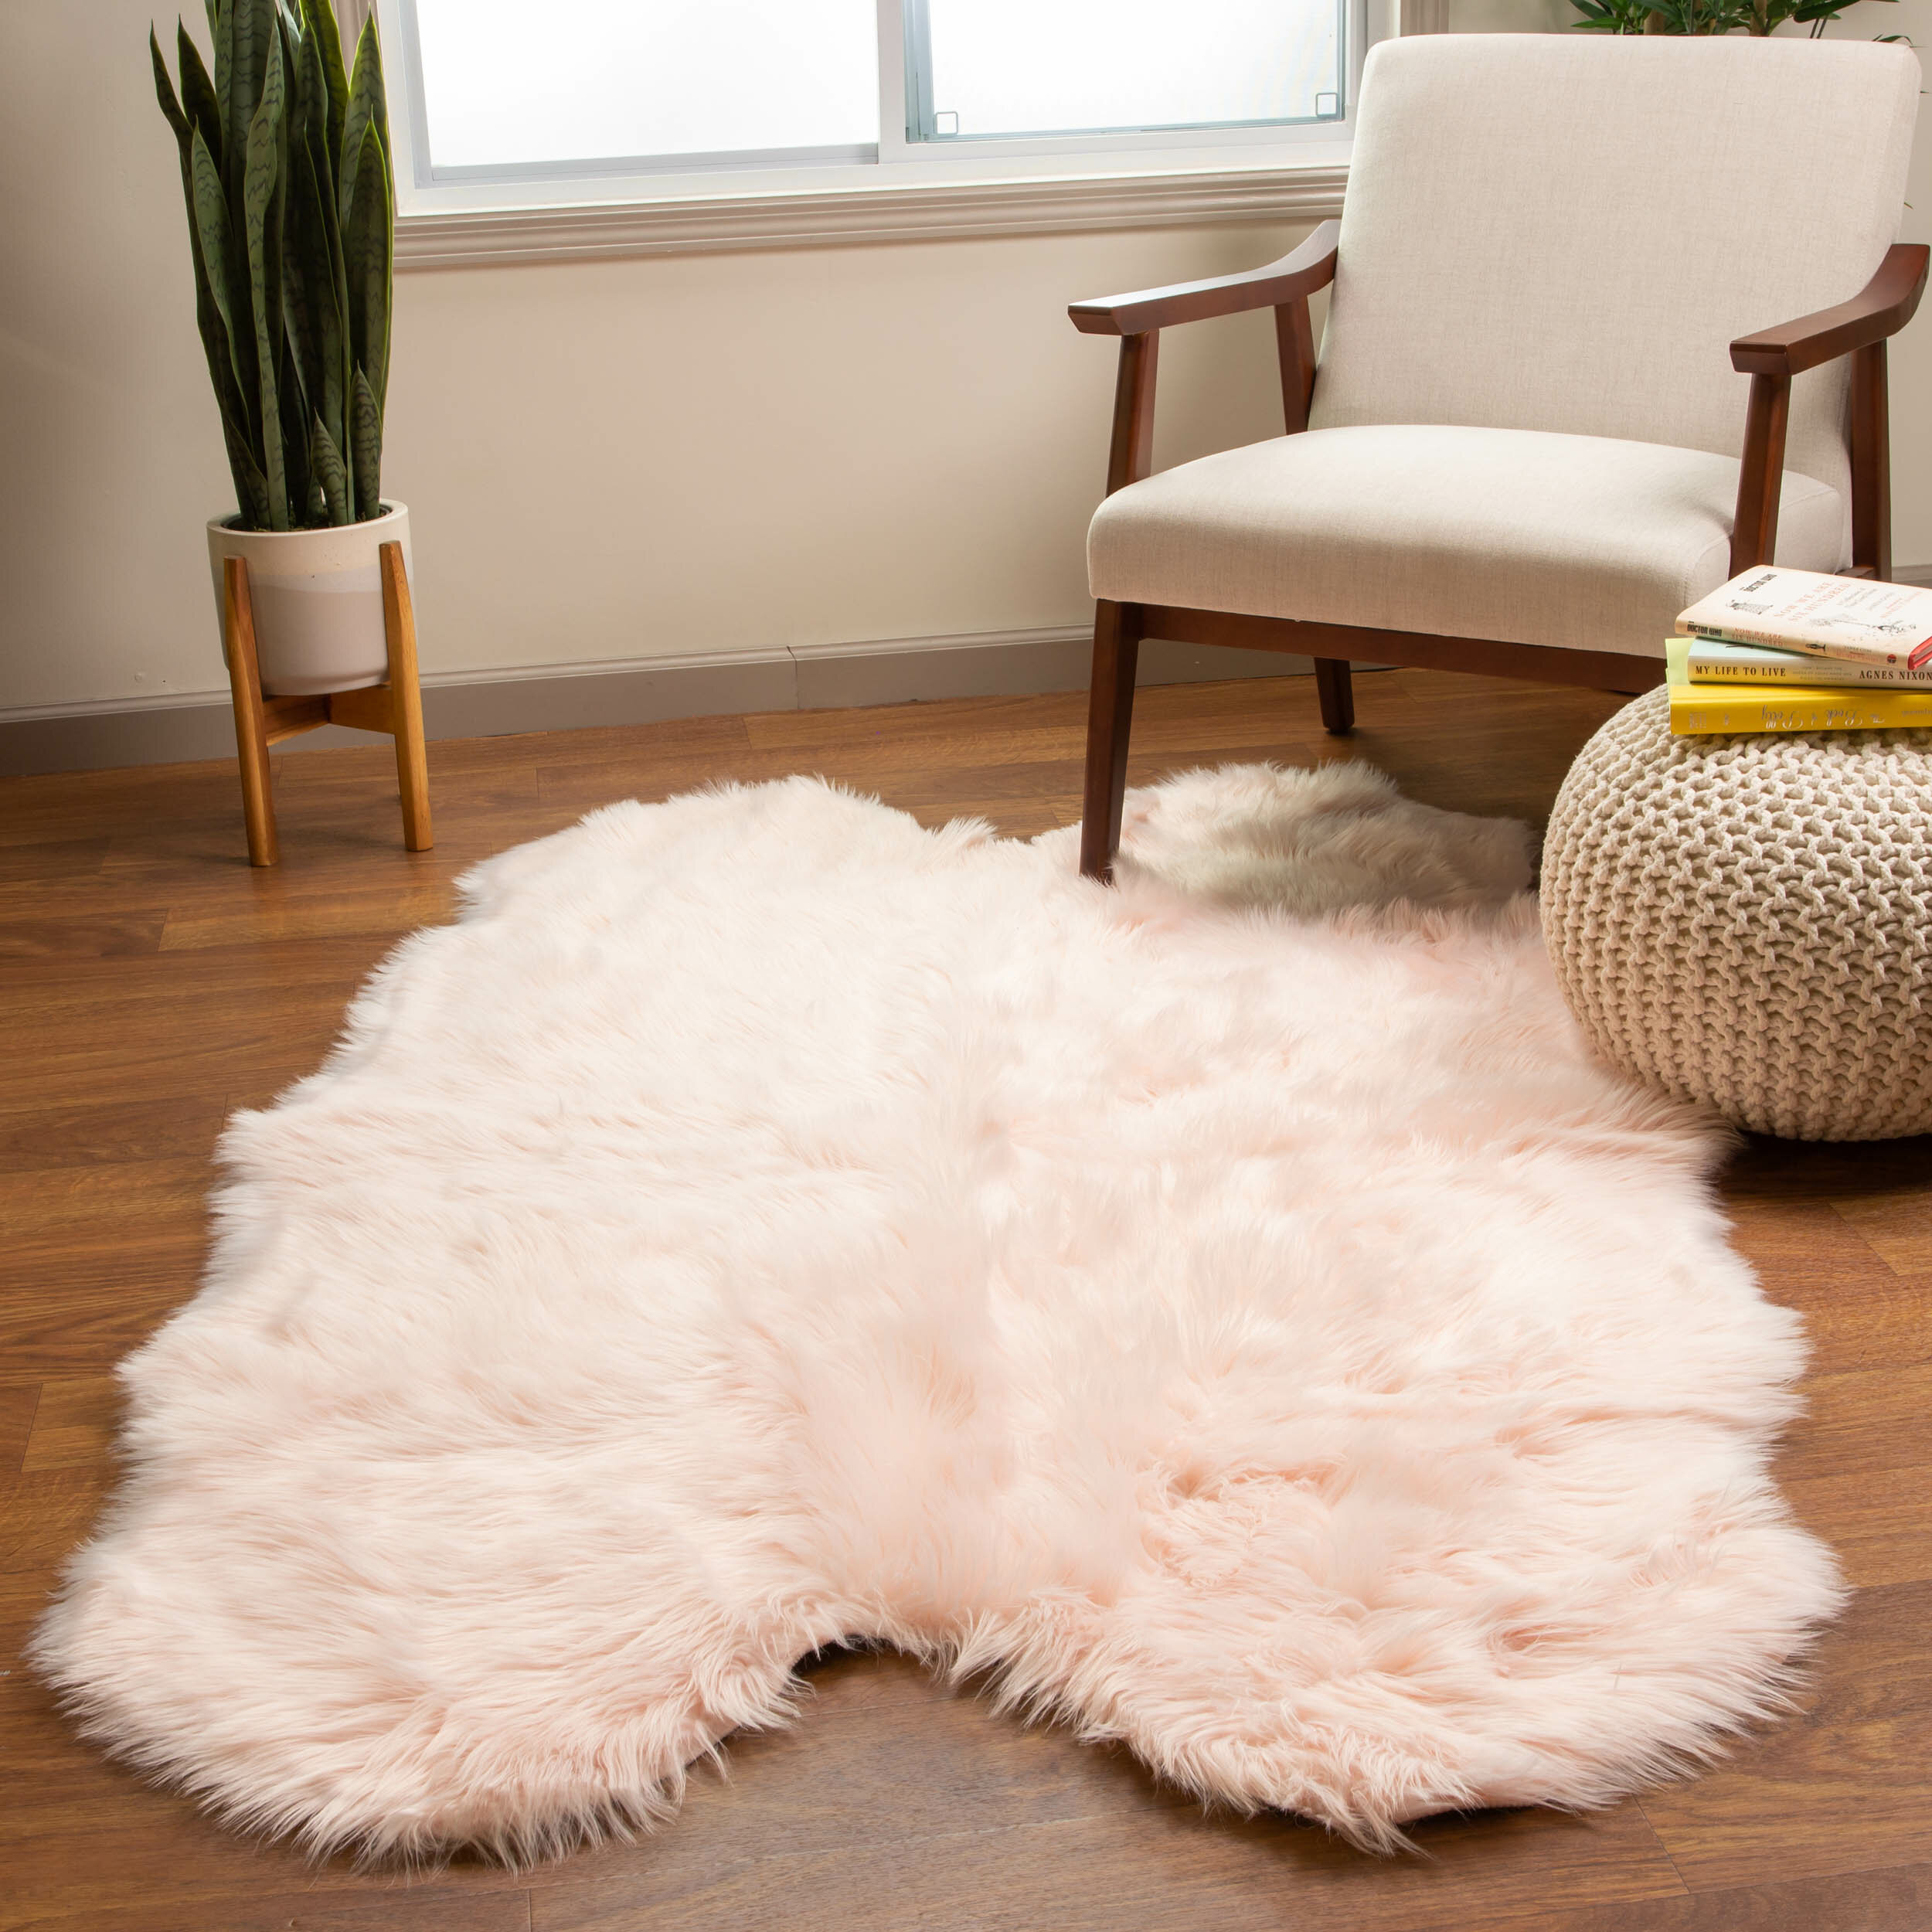 Soft Fluffy Faux Fur Circular Sheepskin Rug Round Floor Mat Available in 4 Sizes 